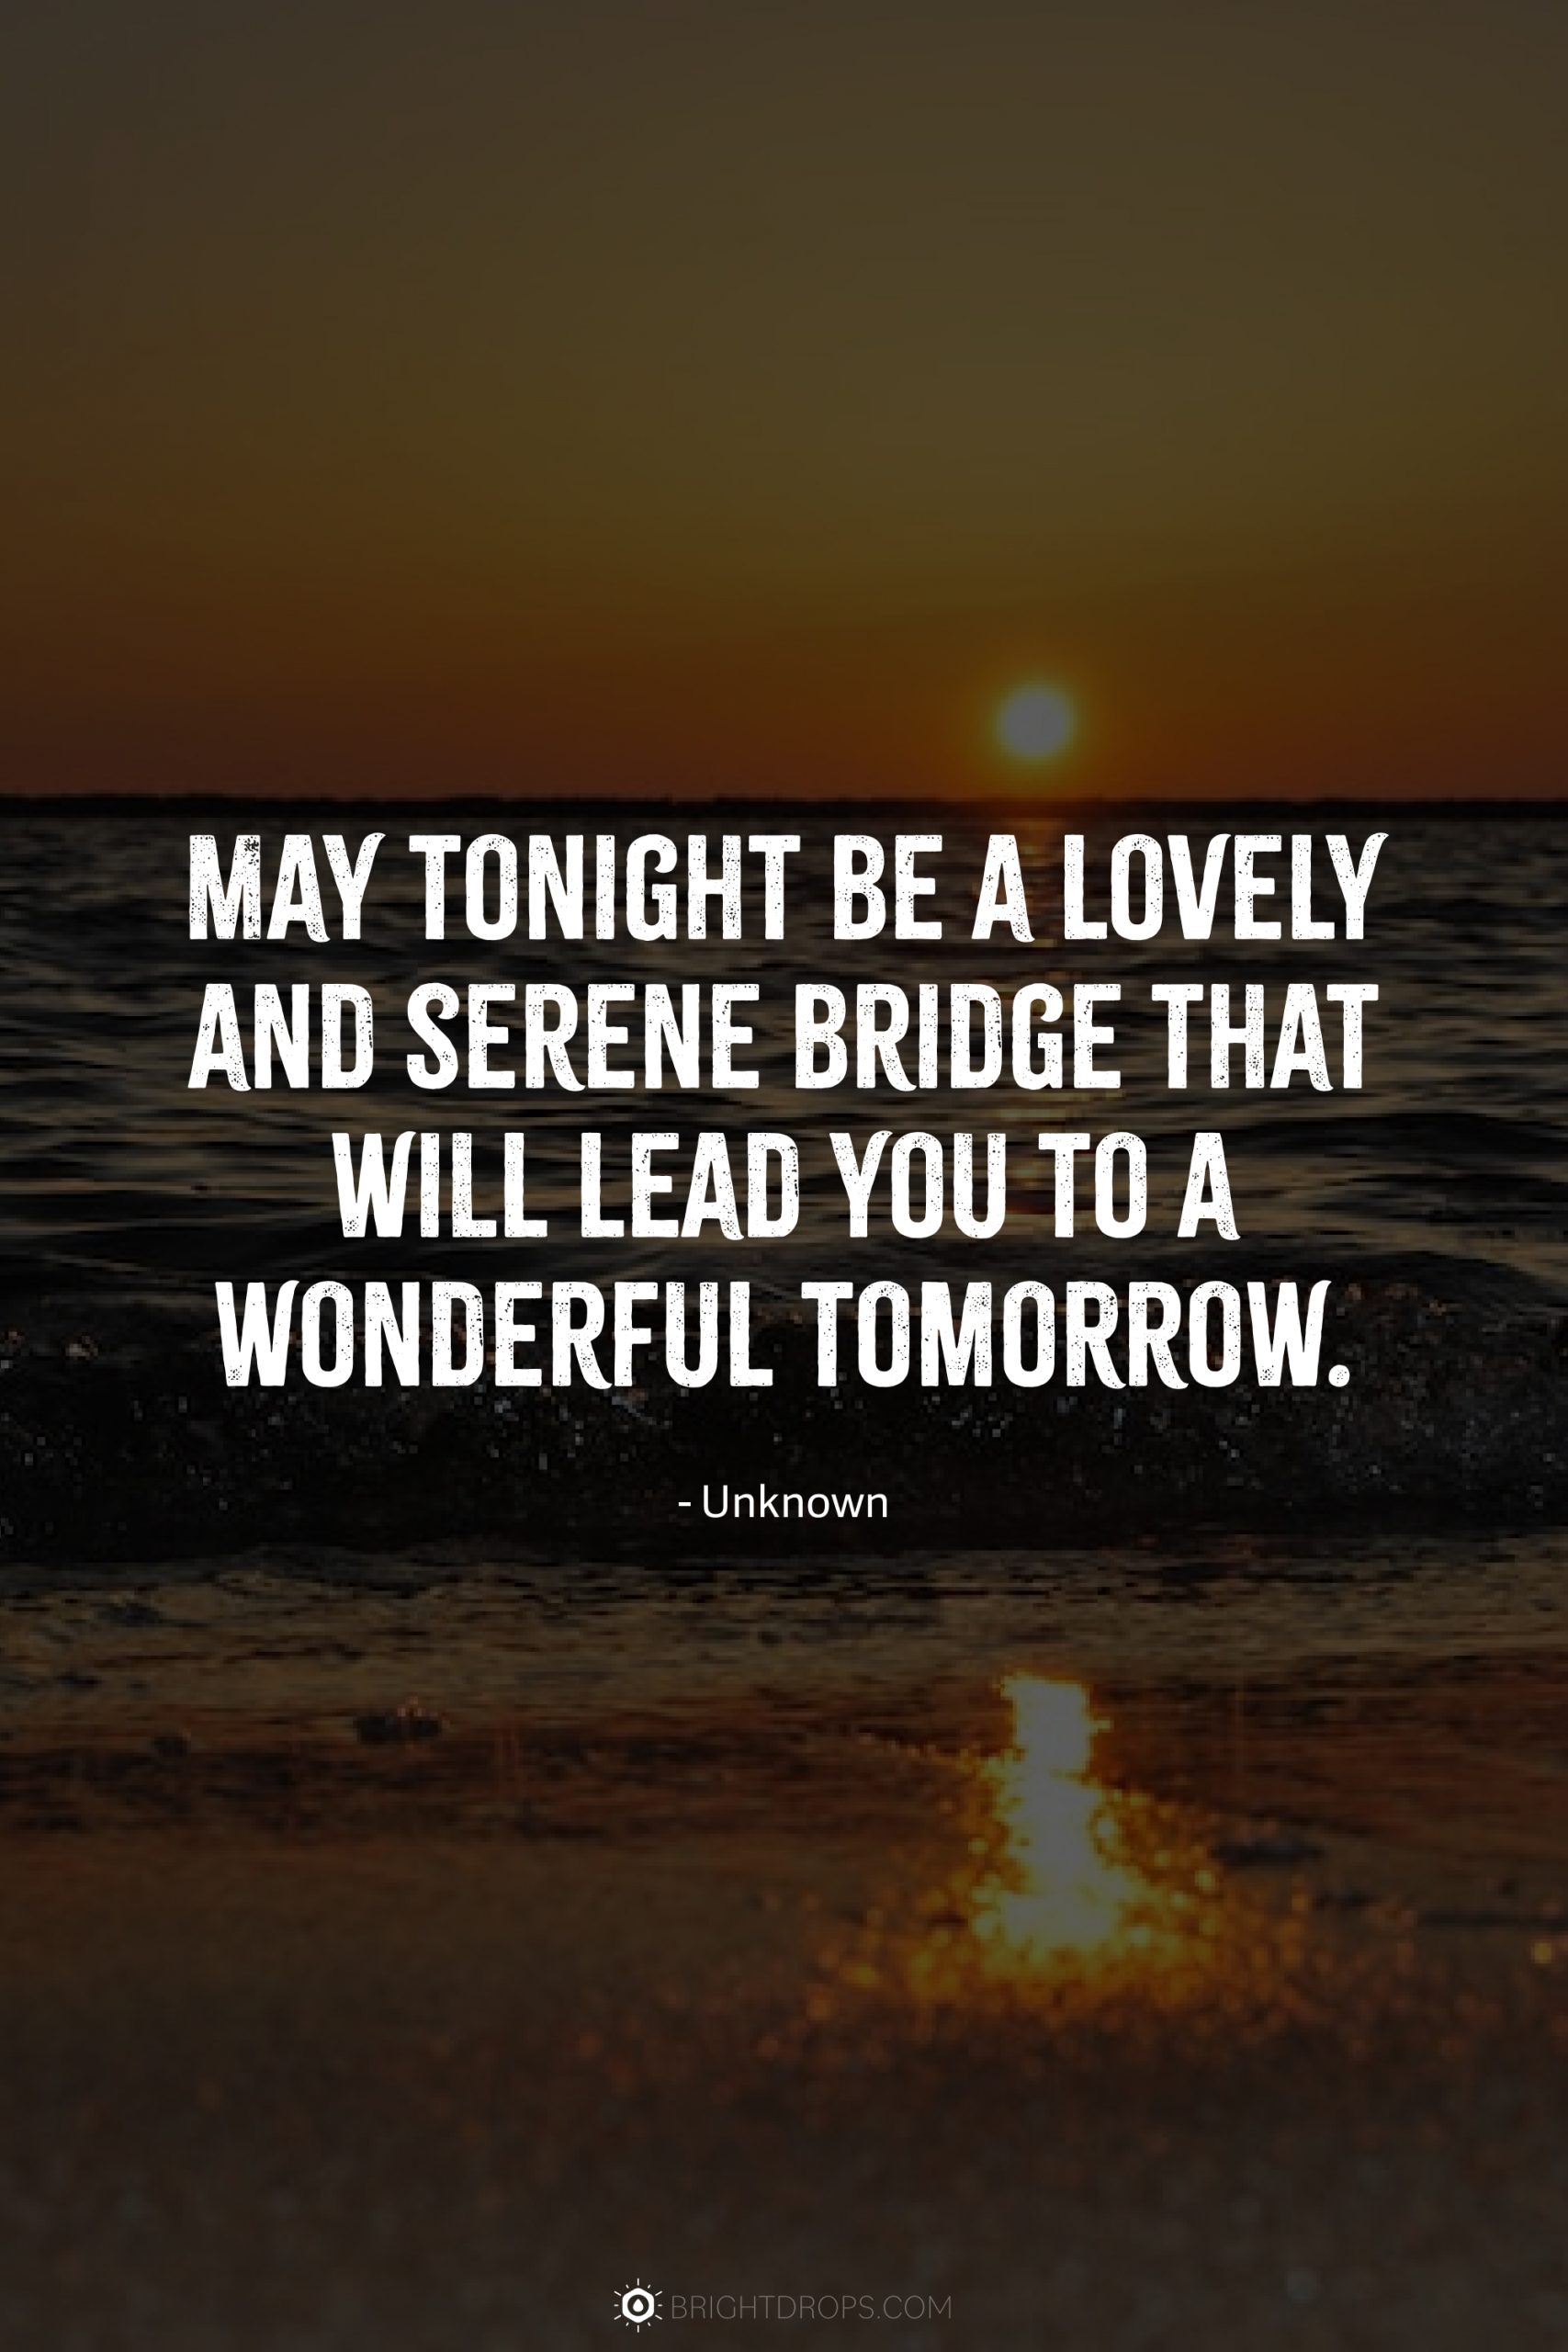 May tonight be a lovely and serene bridge that will lead you to a wonderful tomorrow.